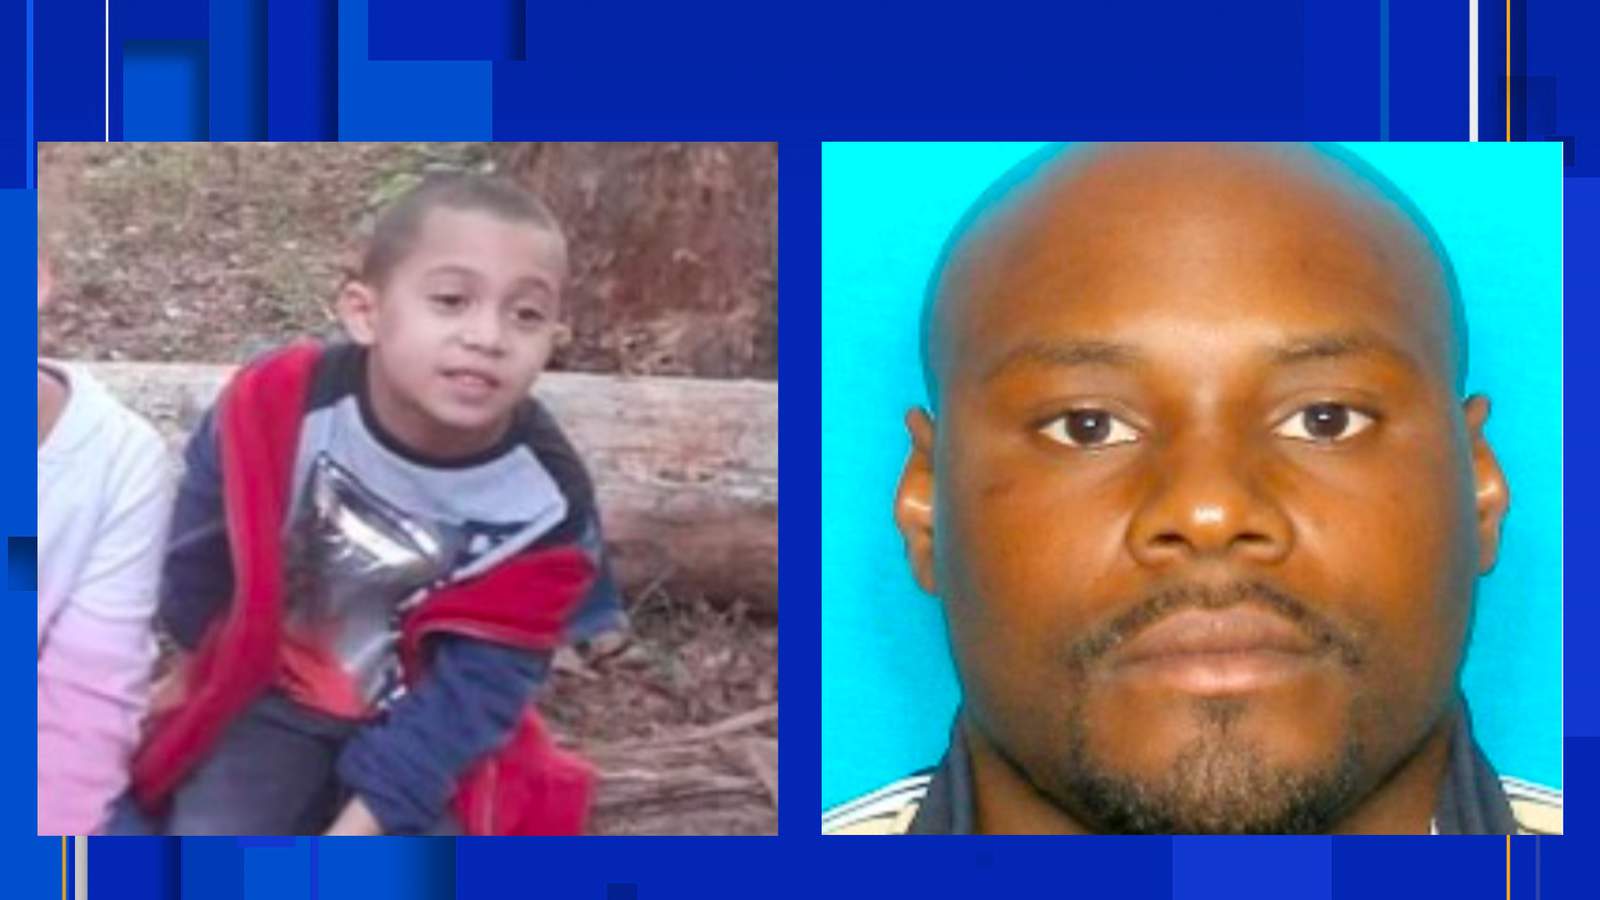 UPDATE: 6-year-old boy possibly taken by suspect with ‘violent tendencies’ found safe